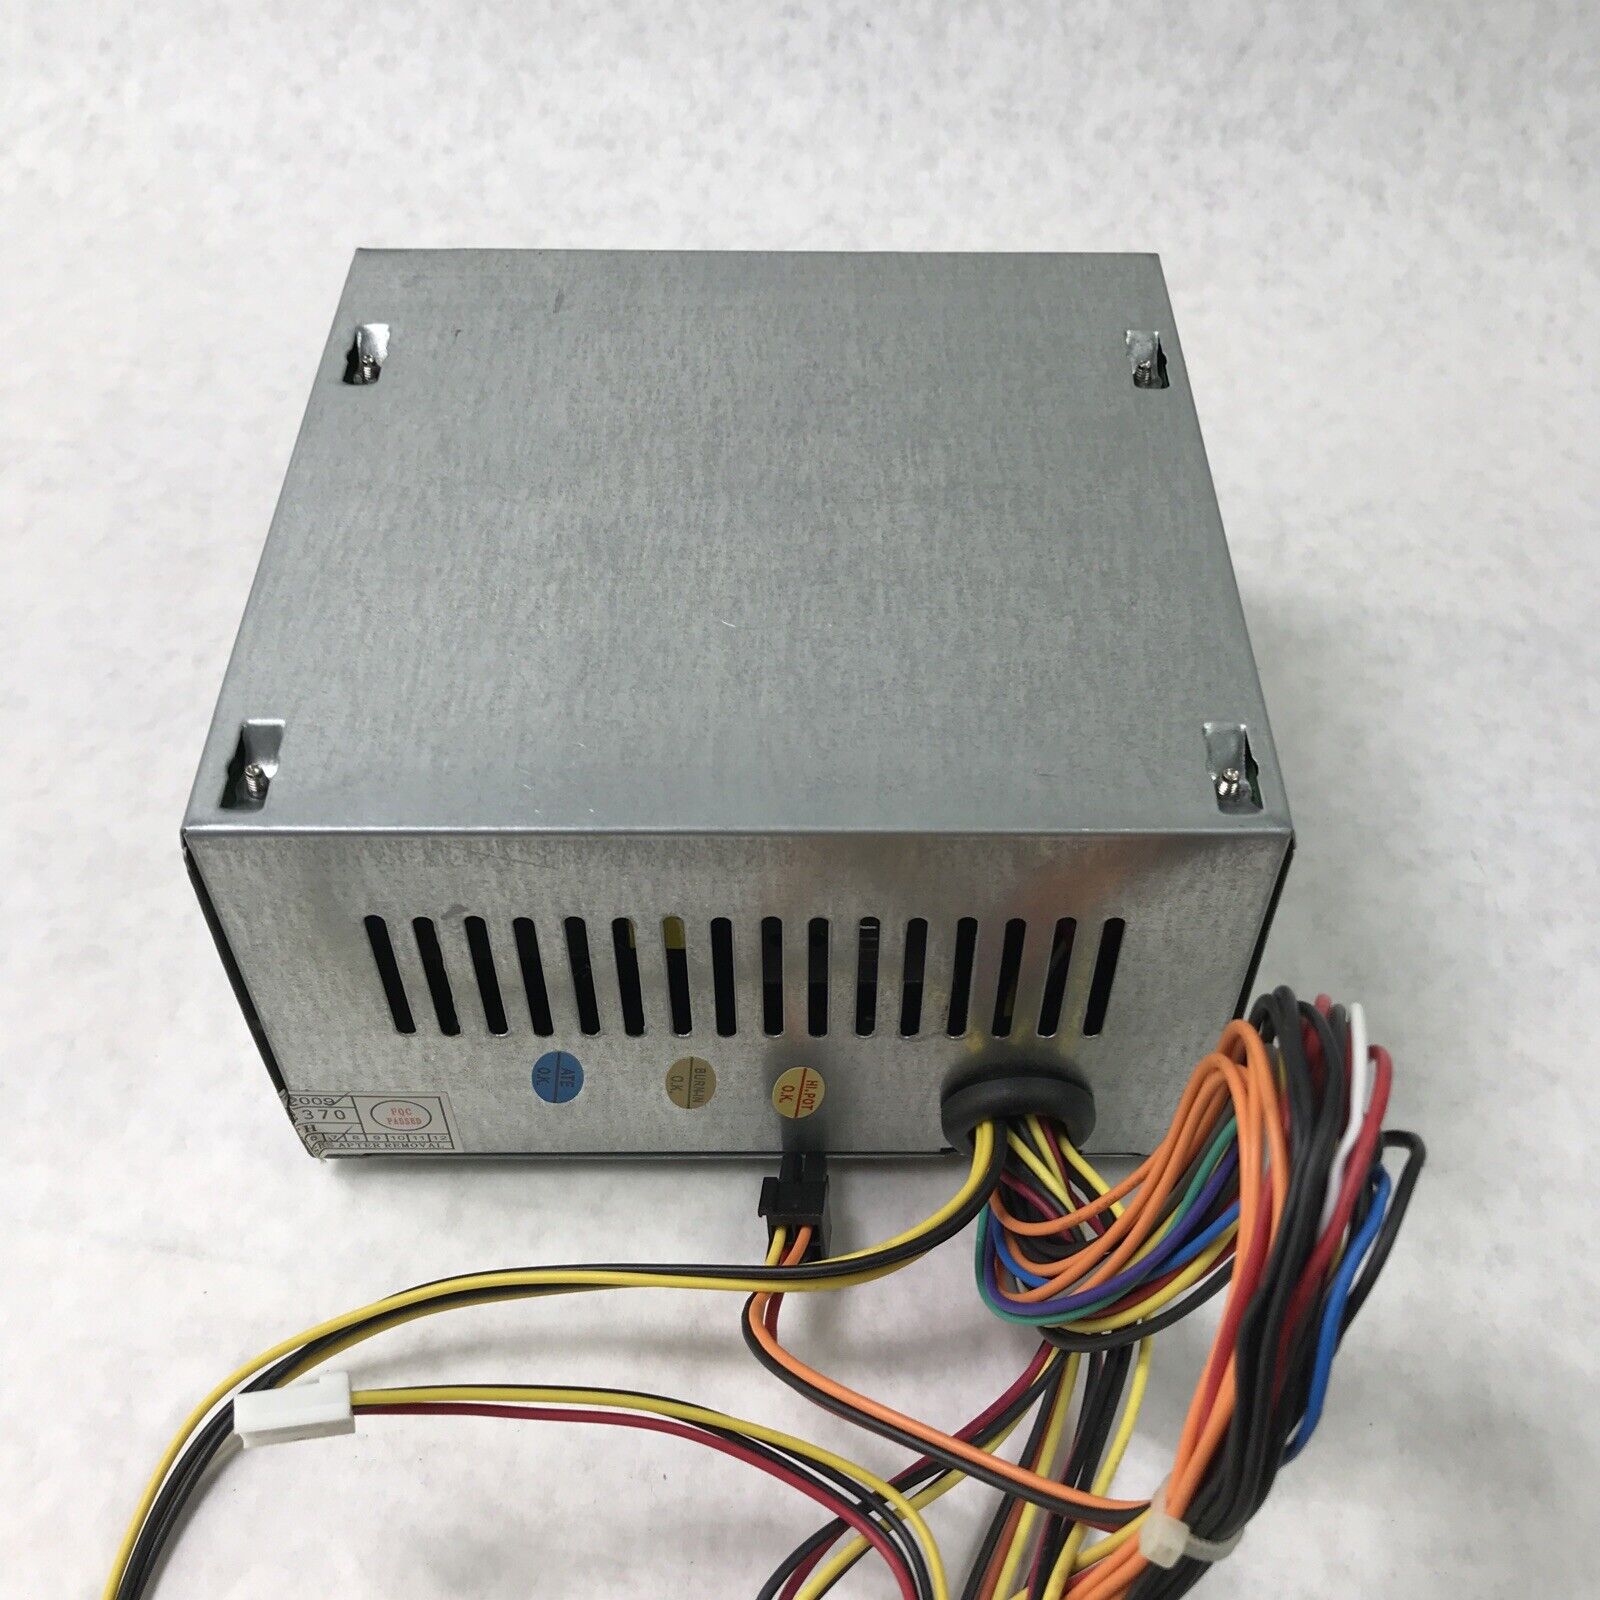 Gen-Max 480W 60Hz 0210031016 Power Supply (Tested and Working)